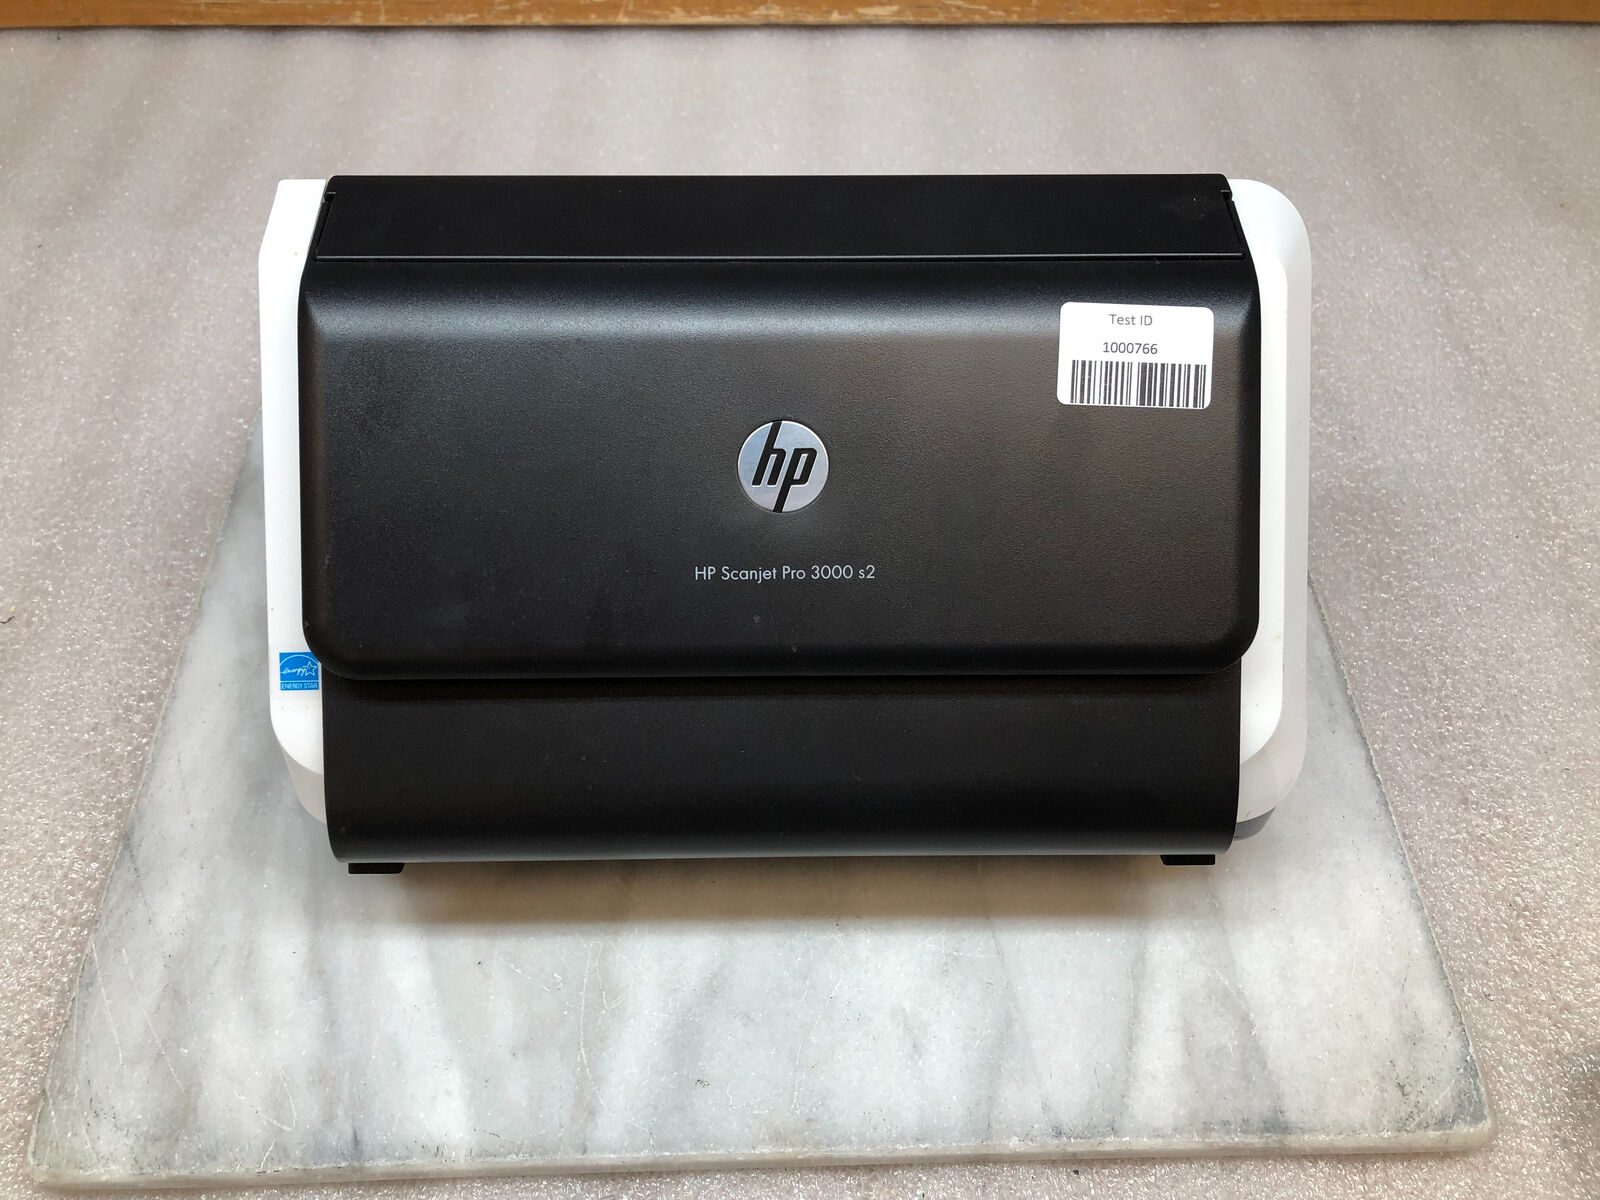 HP ScanJet Pro 3000 S2 Duplex Color Document Sheetfed Scanner W/ Power Adapter